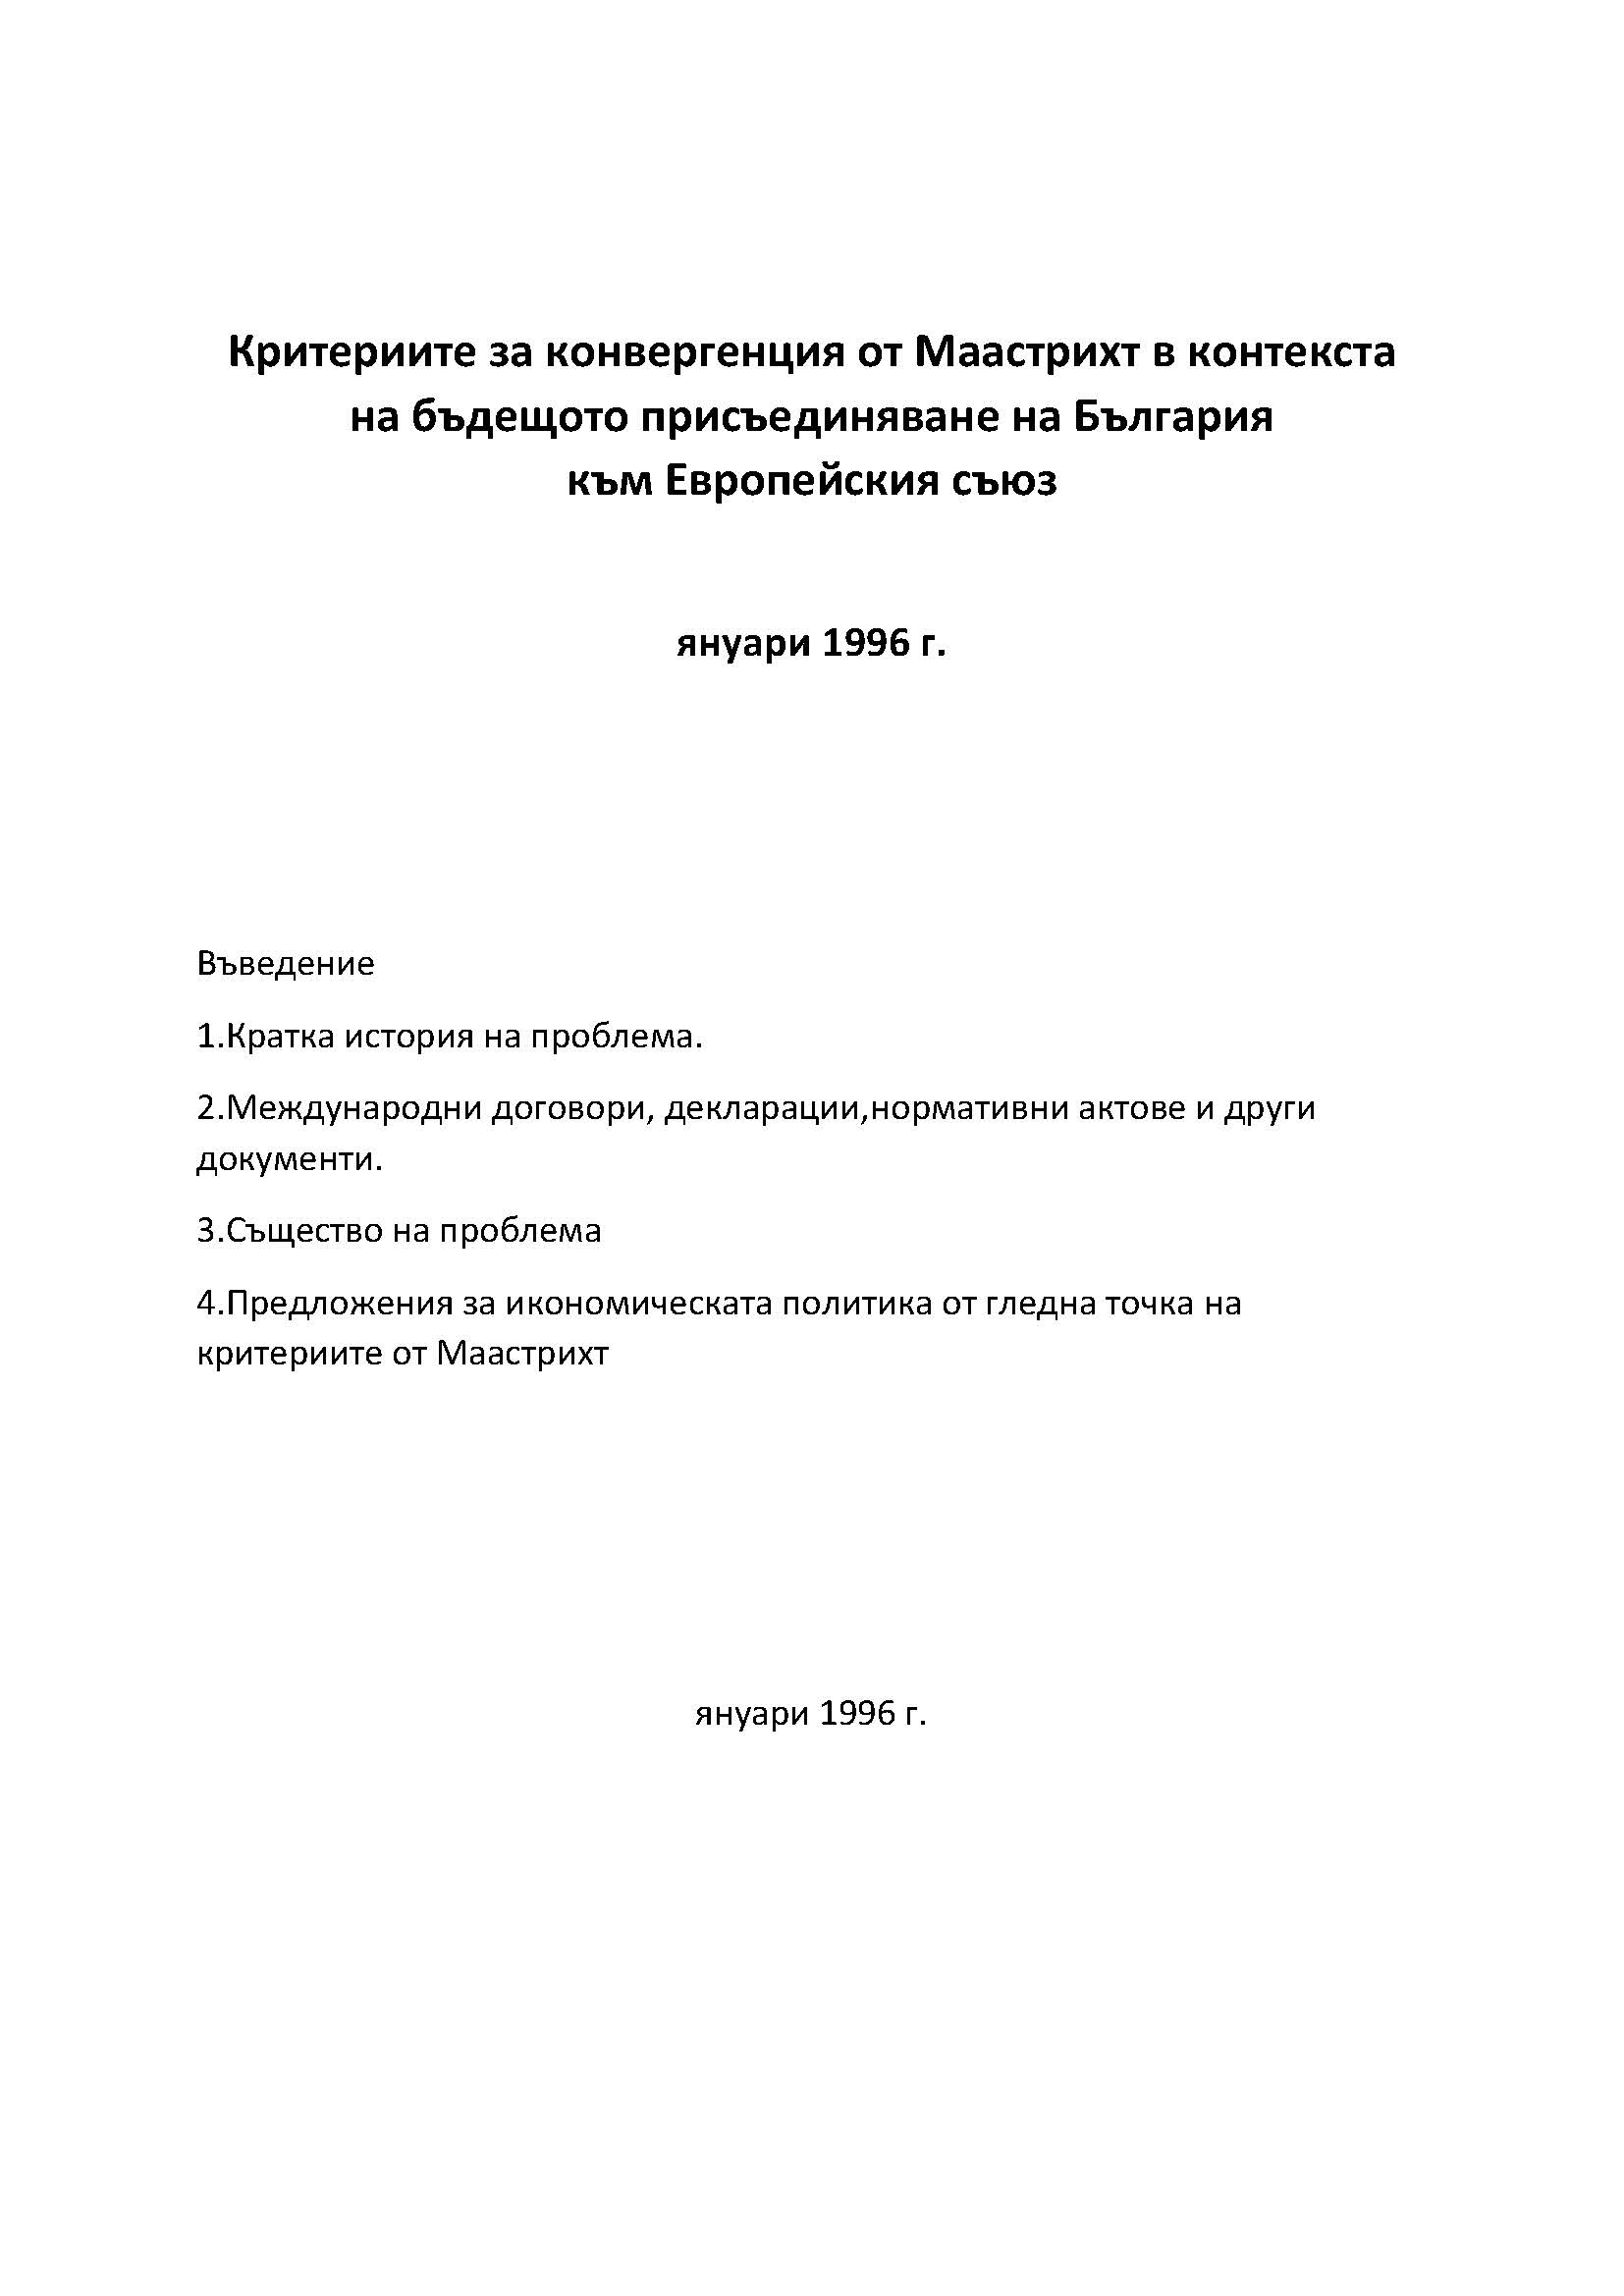 The Maastricht convergence criteria in the context of the future accession of Bulgaria to the European Union, January 1996